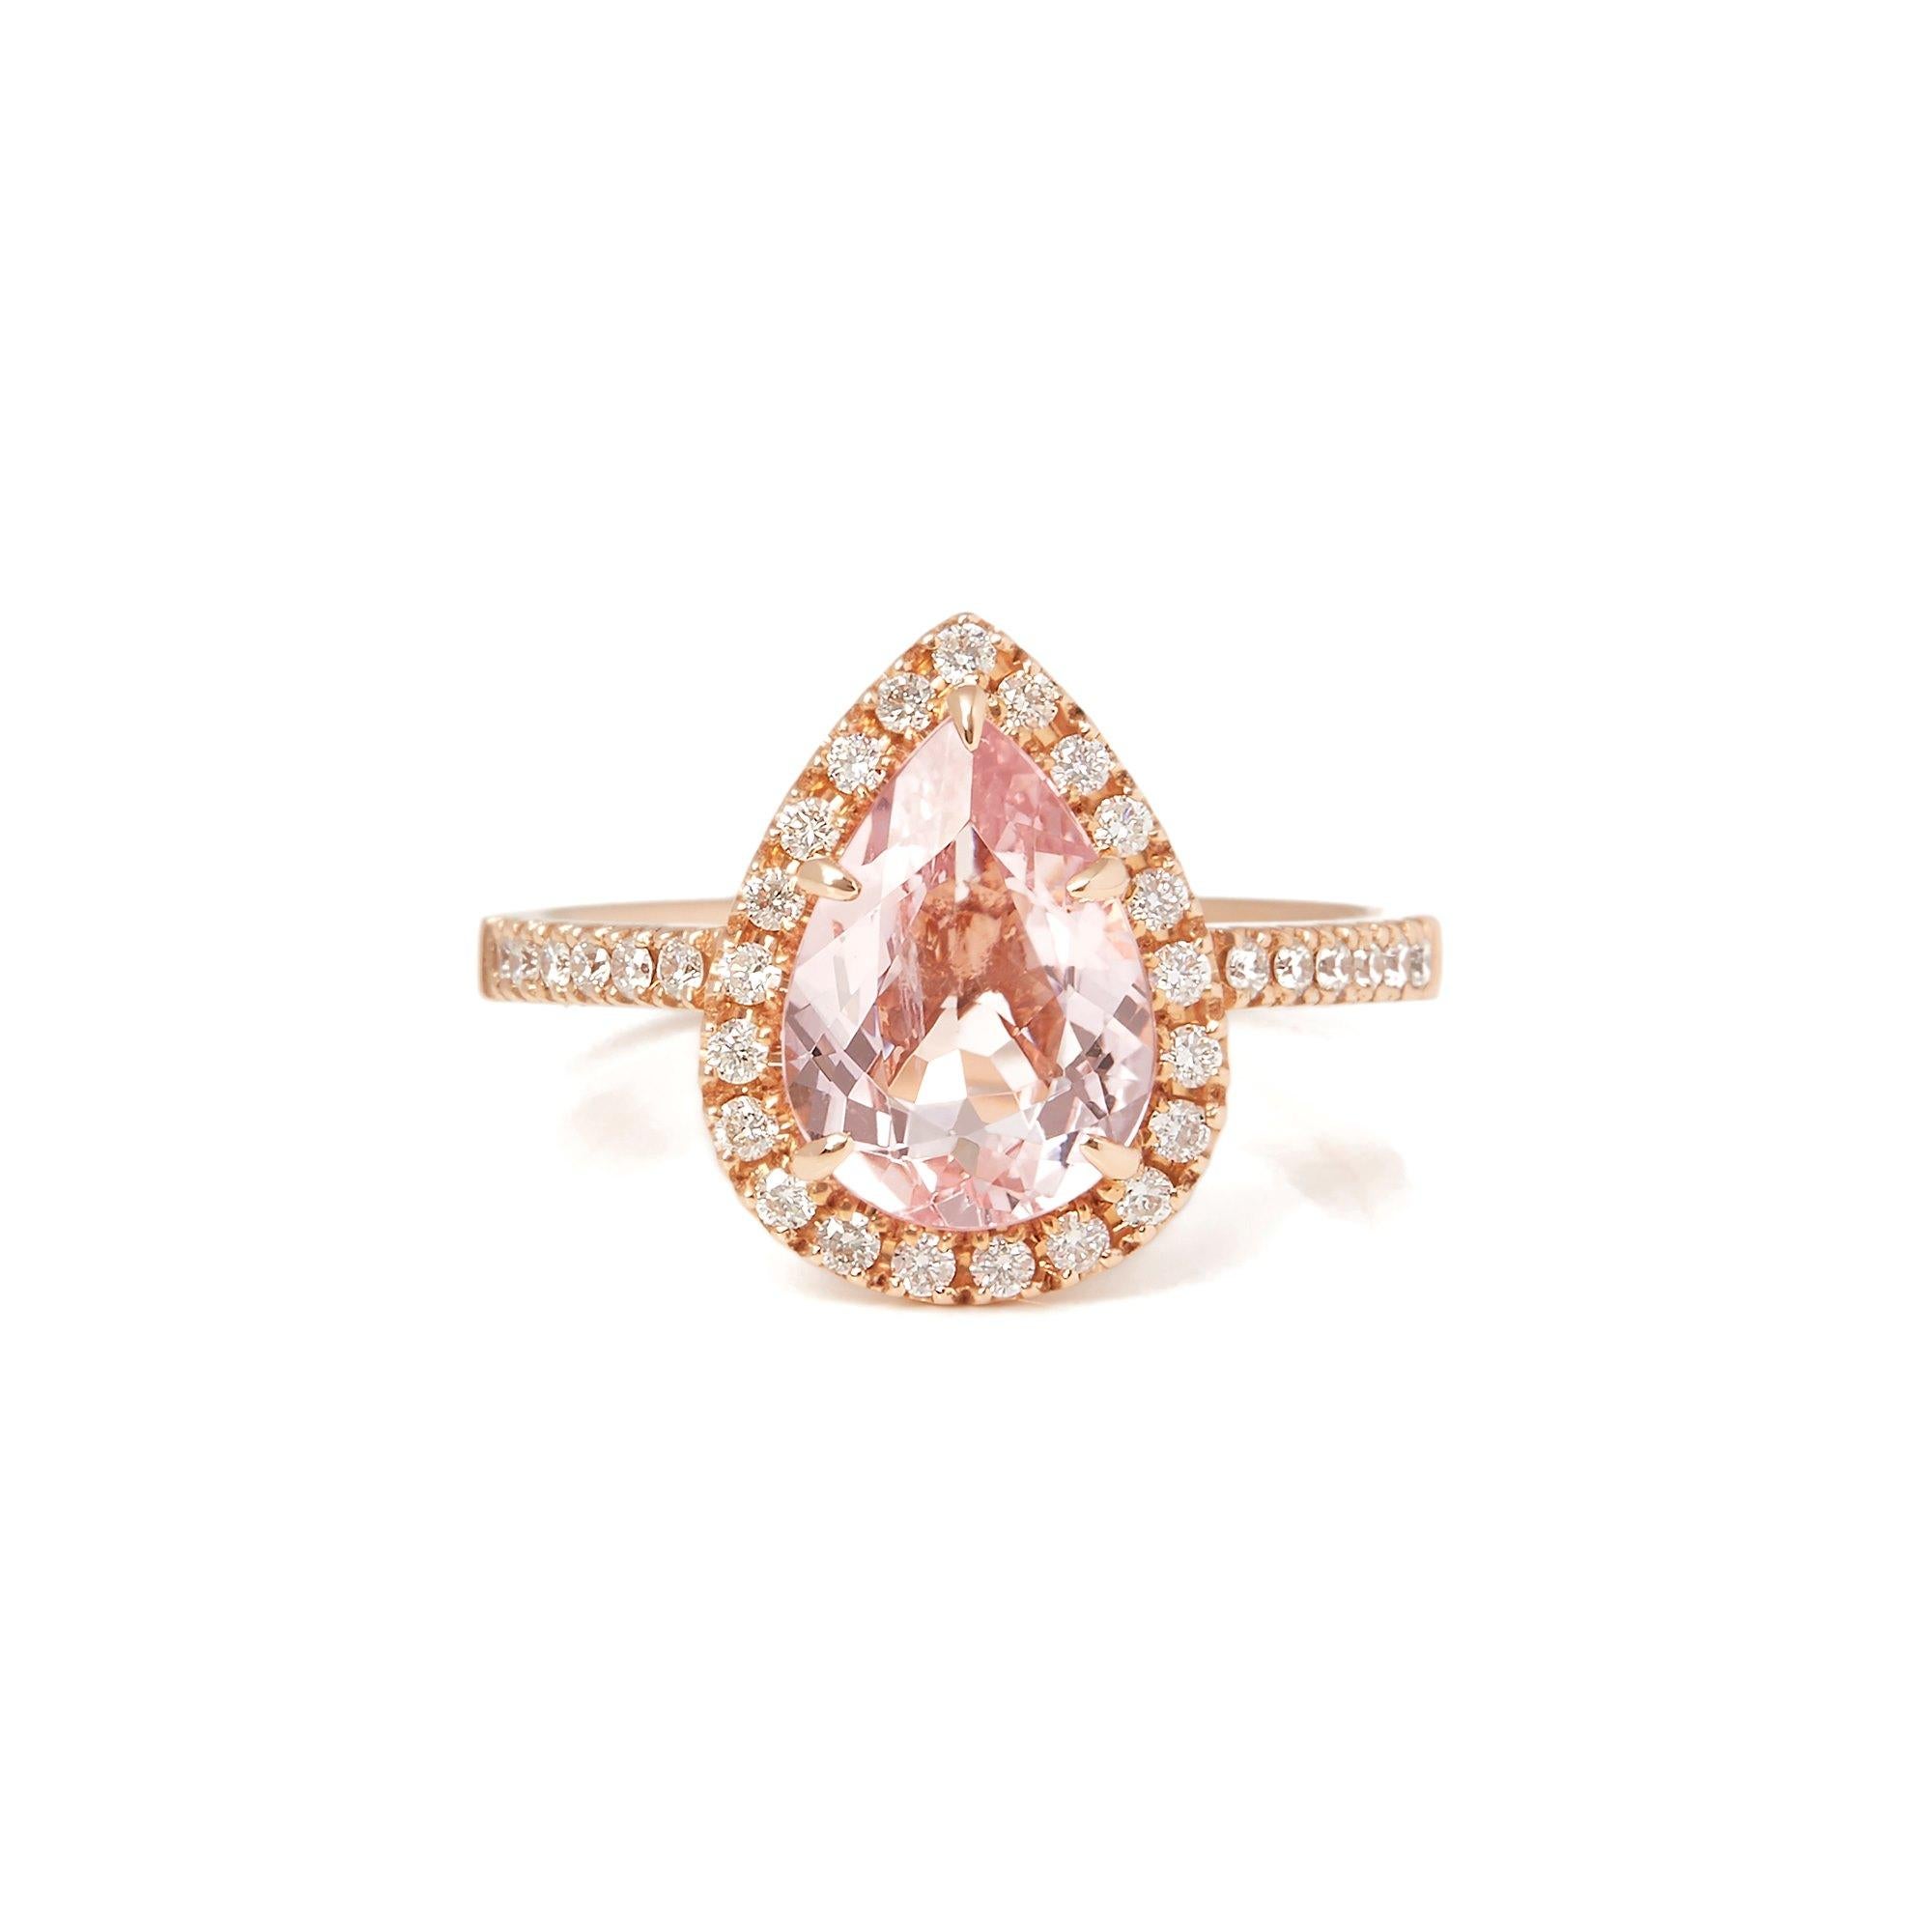 This ring designed by David Jerome is from his private collection and features one pear cut morganite totalling 1.84cts sourced in Brazil. Set with round brilliant cut diamonds totalling 0.33cts mounted in an 18k rose gold setting. Finger size UK  M